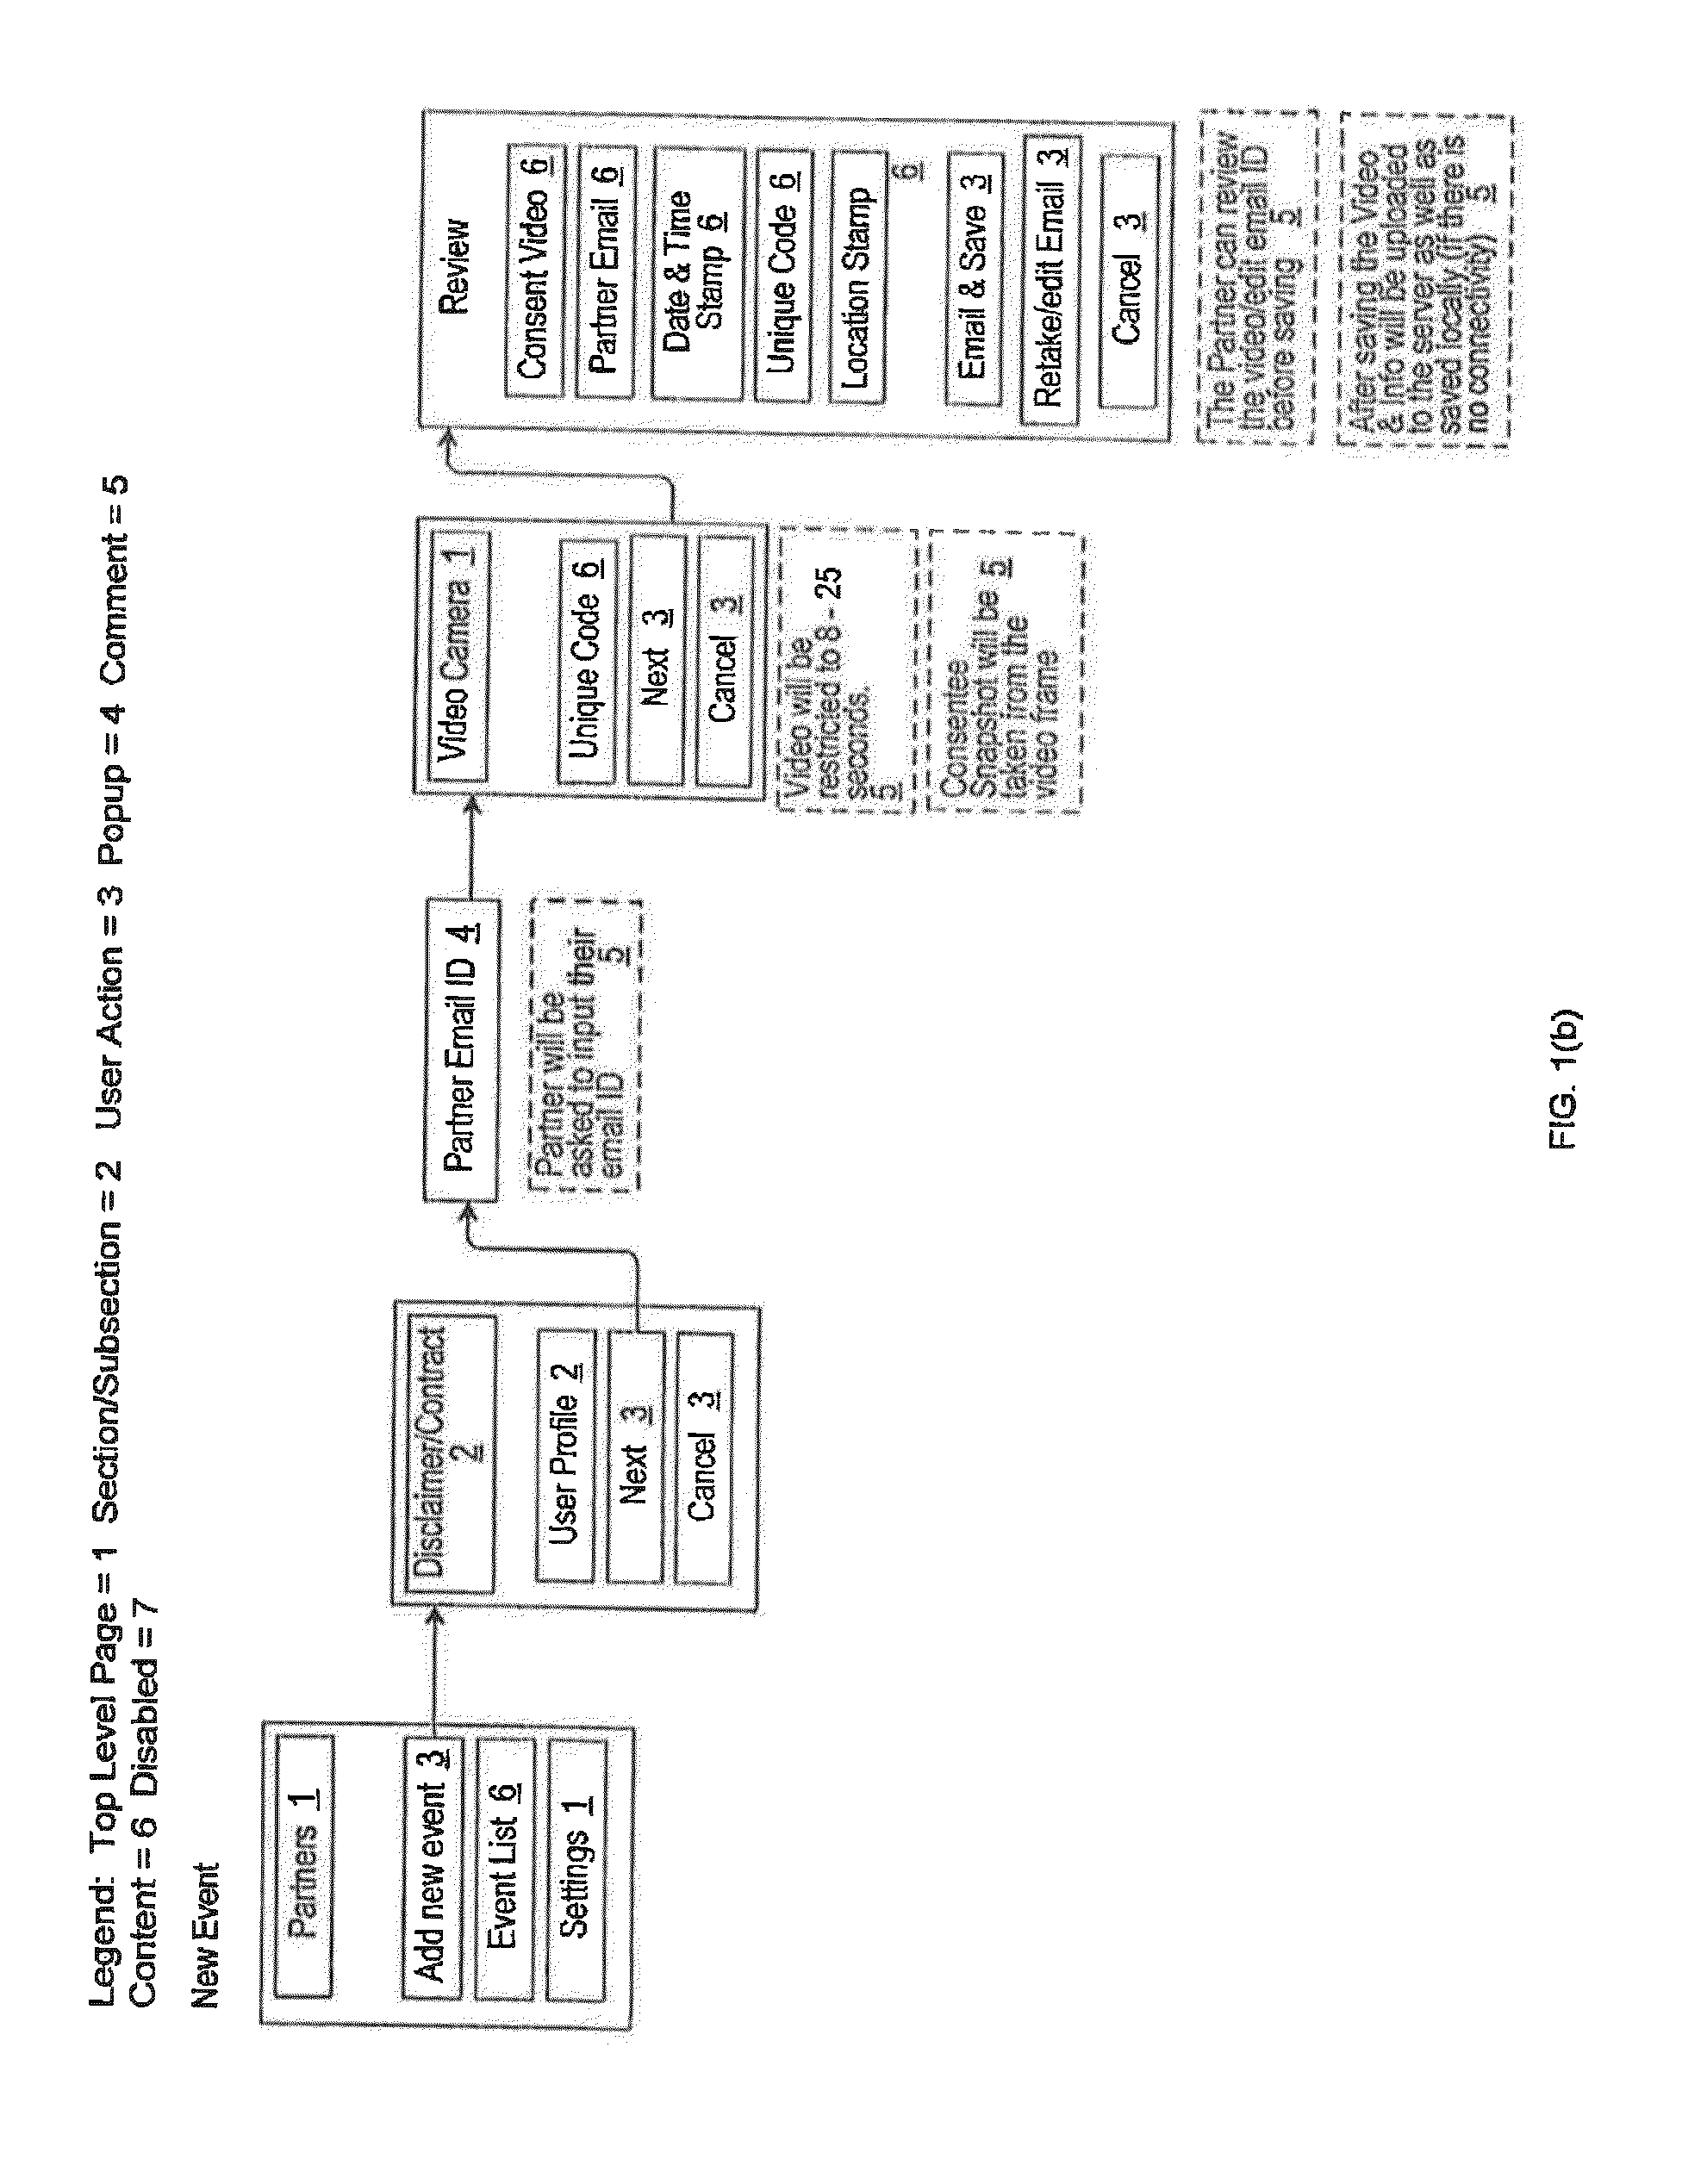 Method and System for Digital Signing for Consent Using a Video Consent Signature and Cognitive Test